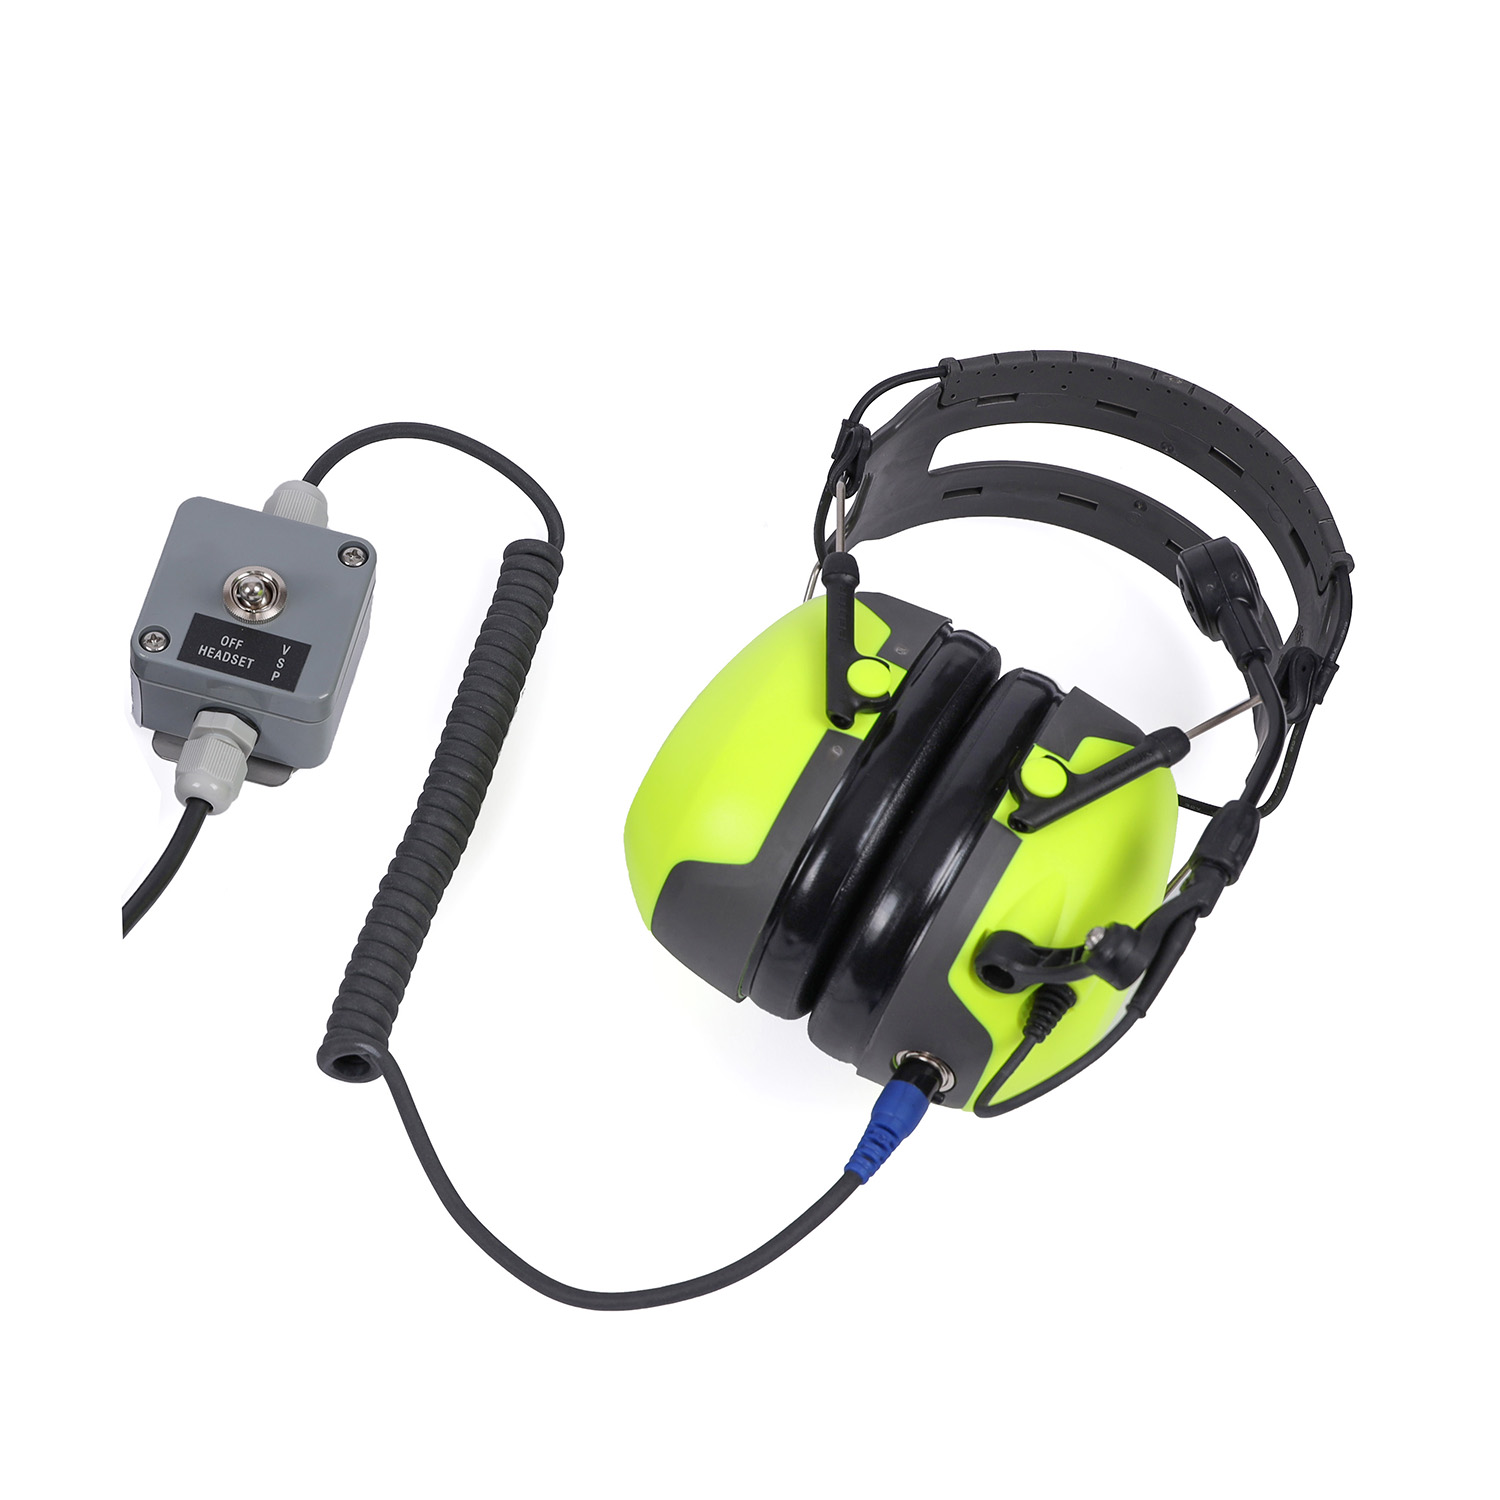 1020600787 VMP36PELAd Headset with NC microphone and 10 meter cable without plug.
replacement for VMP36PELY